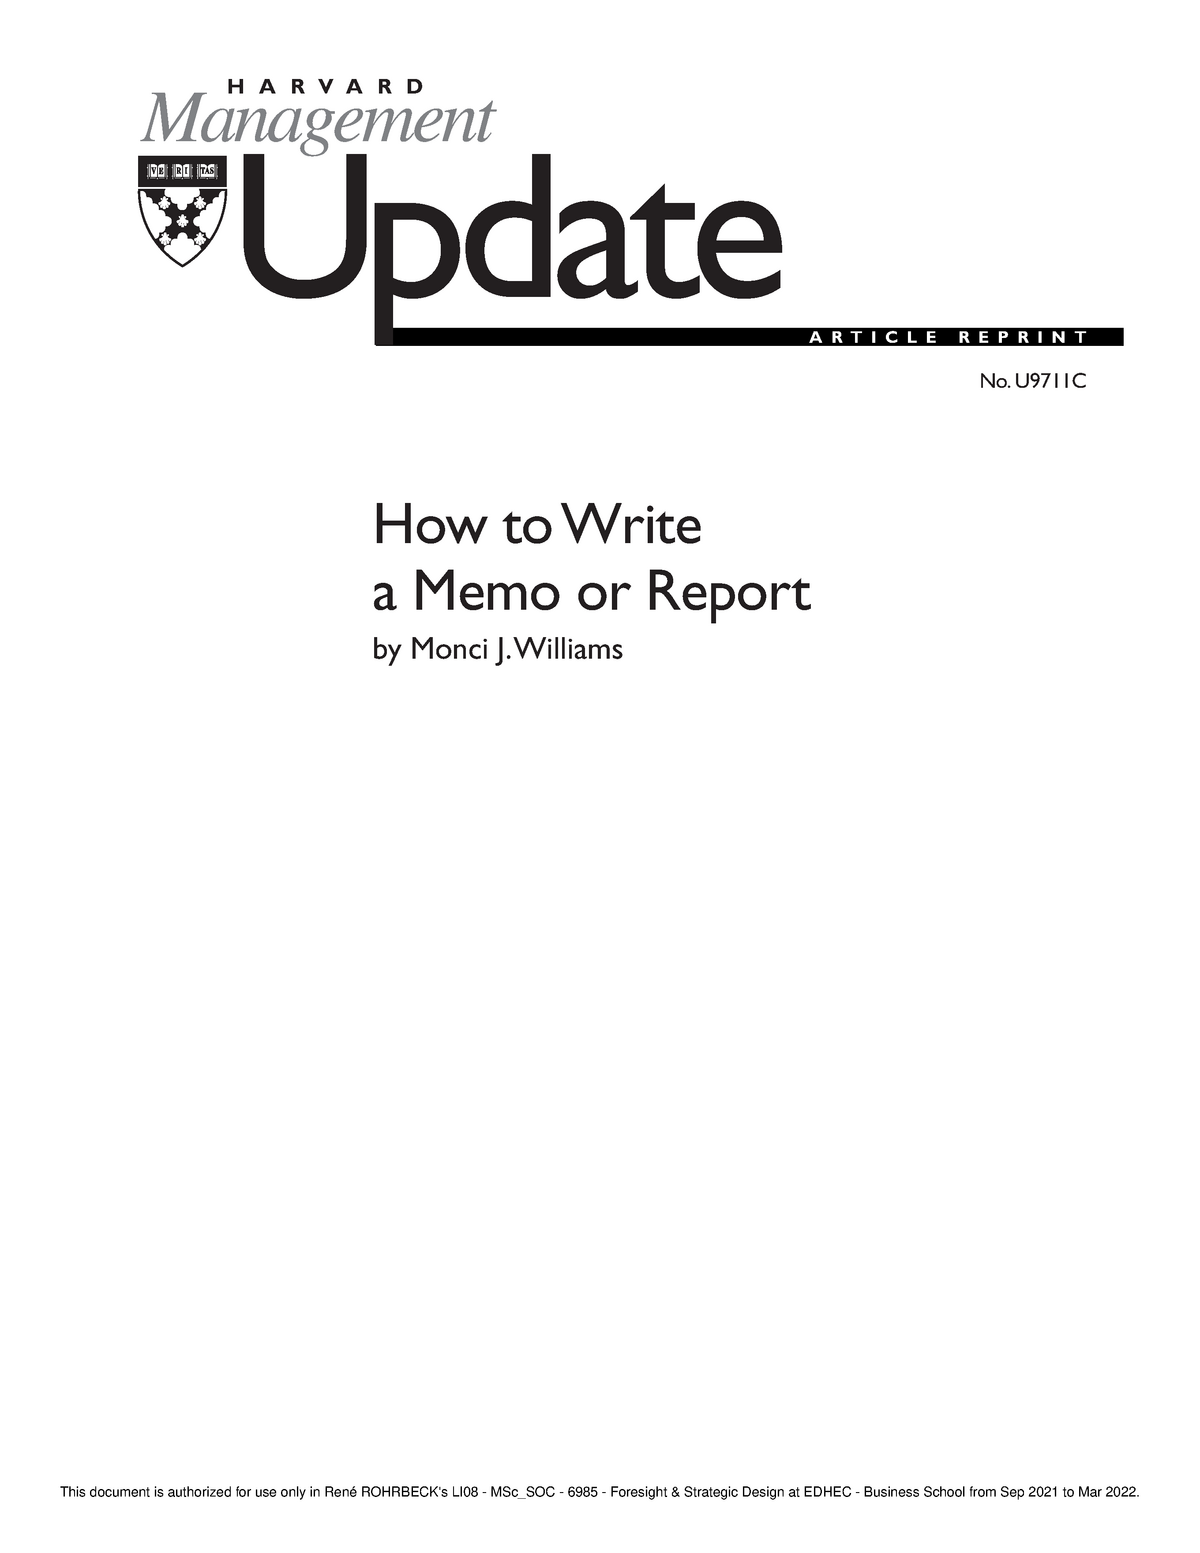 mckinsey-how-to-write-a-memo-or-report-article-reprint-management